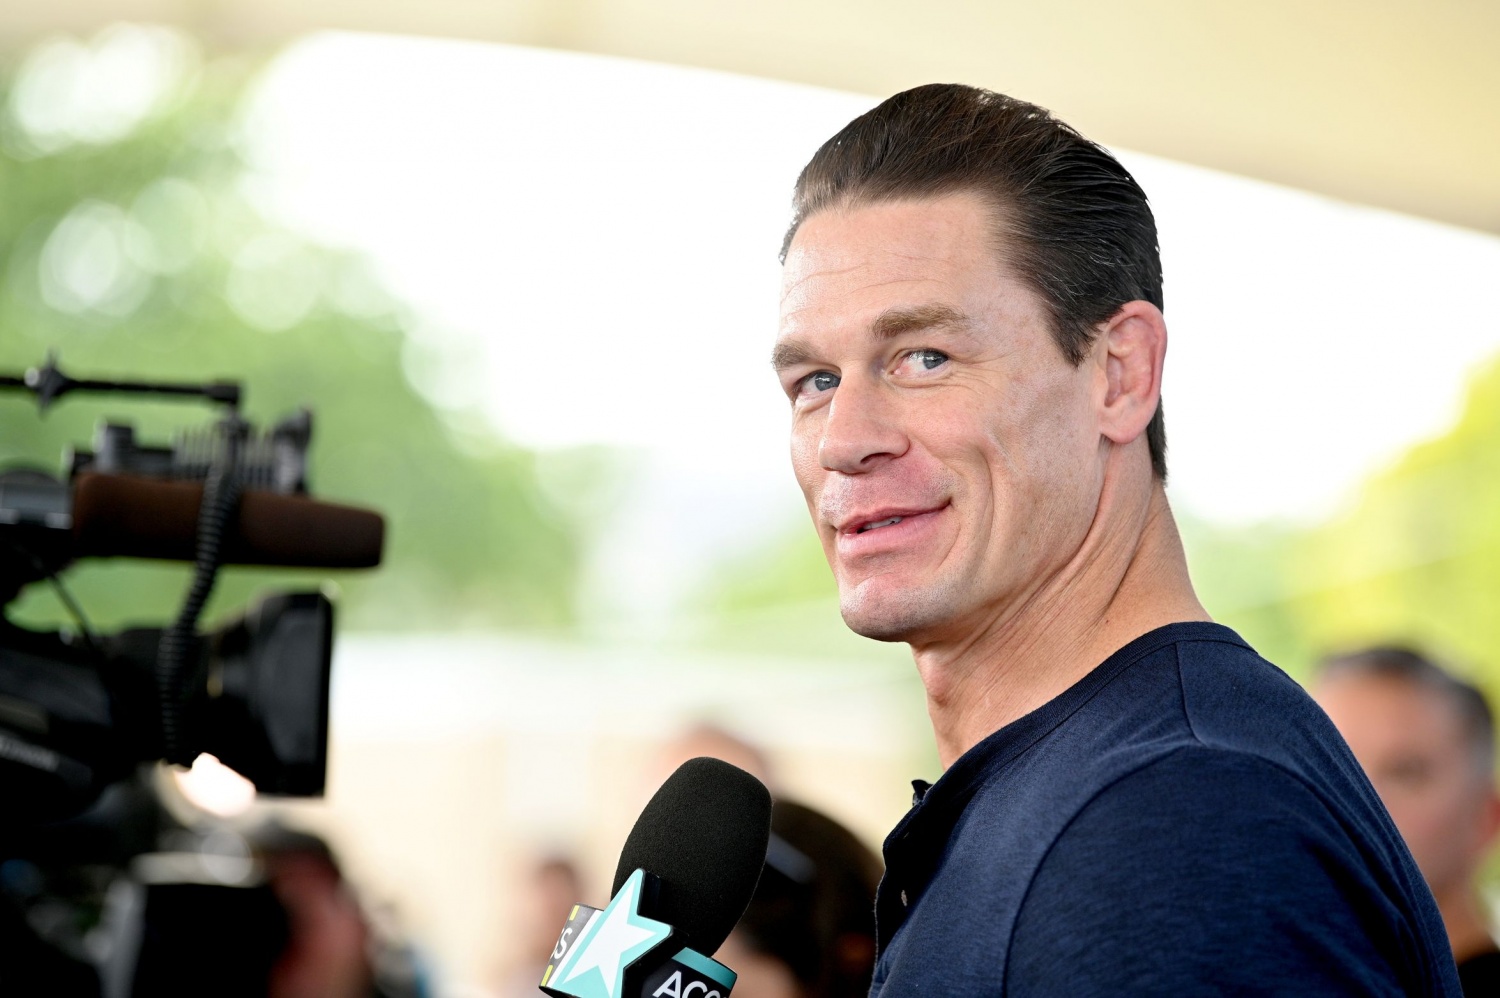 John Cena attends "The Road to F9" Global Fan Extravaganza at Maurice A. Ferre Park on January 31, 2020 in Miami, Florida. (Photo by Dia Dipasupil/Getty Images)